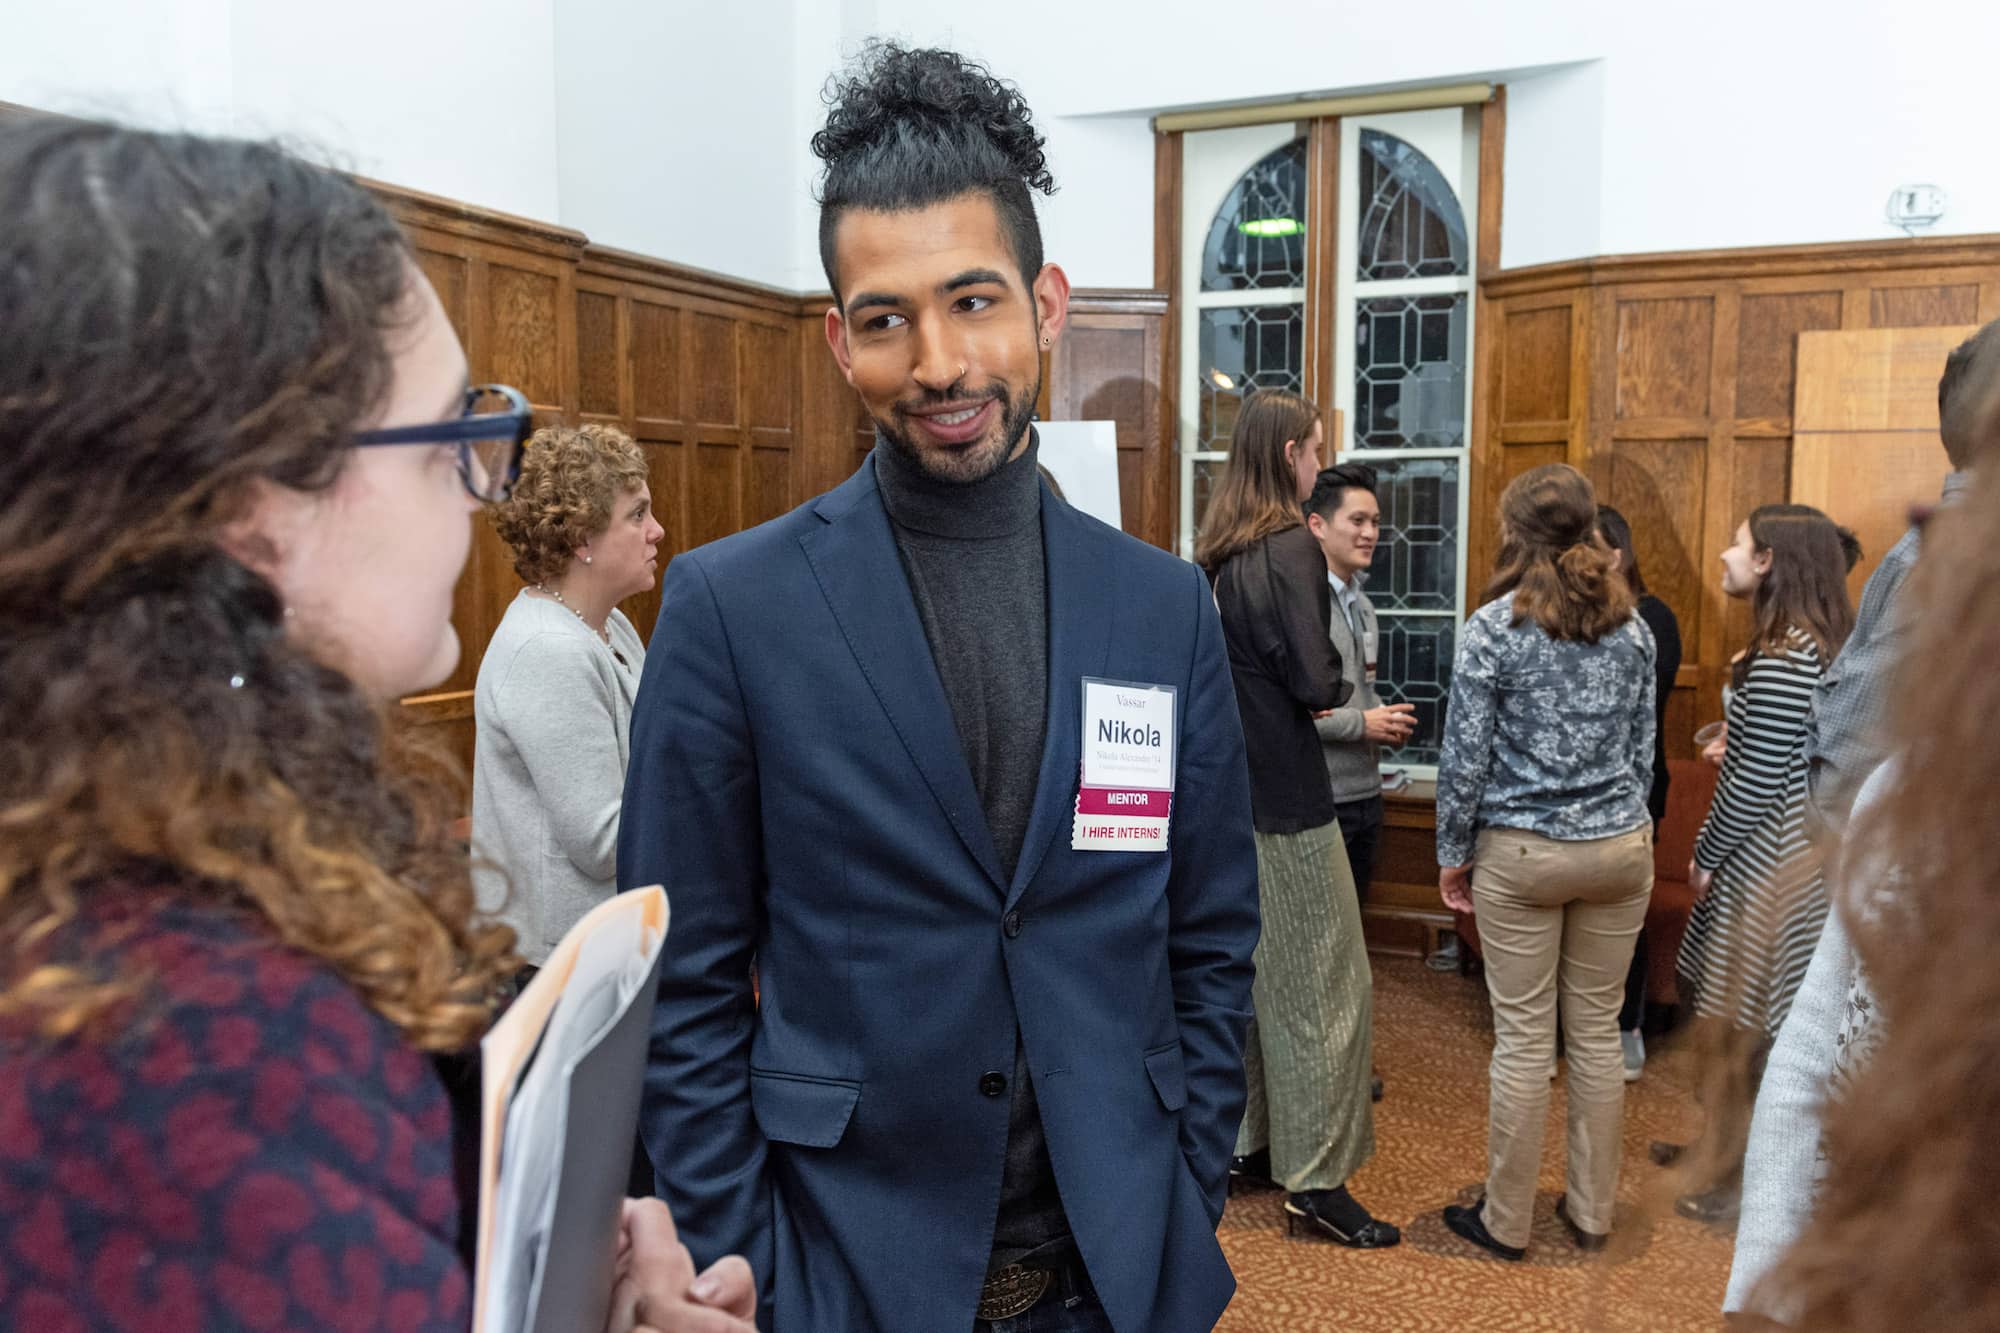 One person with their curly hair up wearing a blue blazer and grey turtle neck stands next to a person who has curly hair and glasses as they talk at an event.